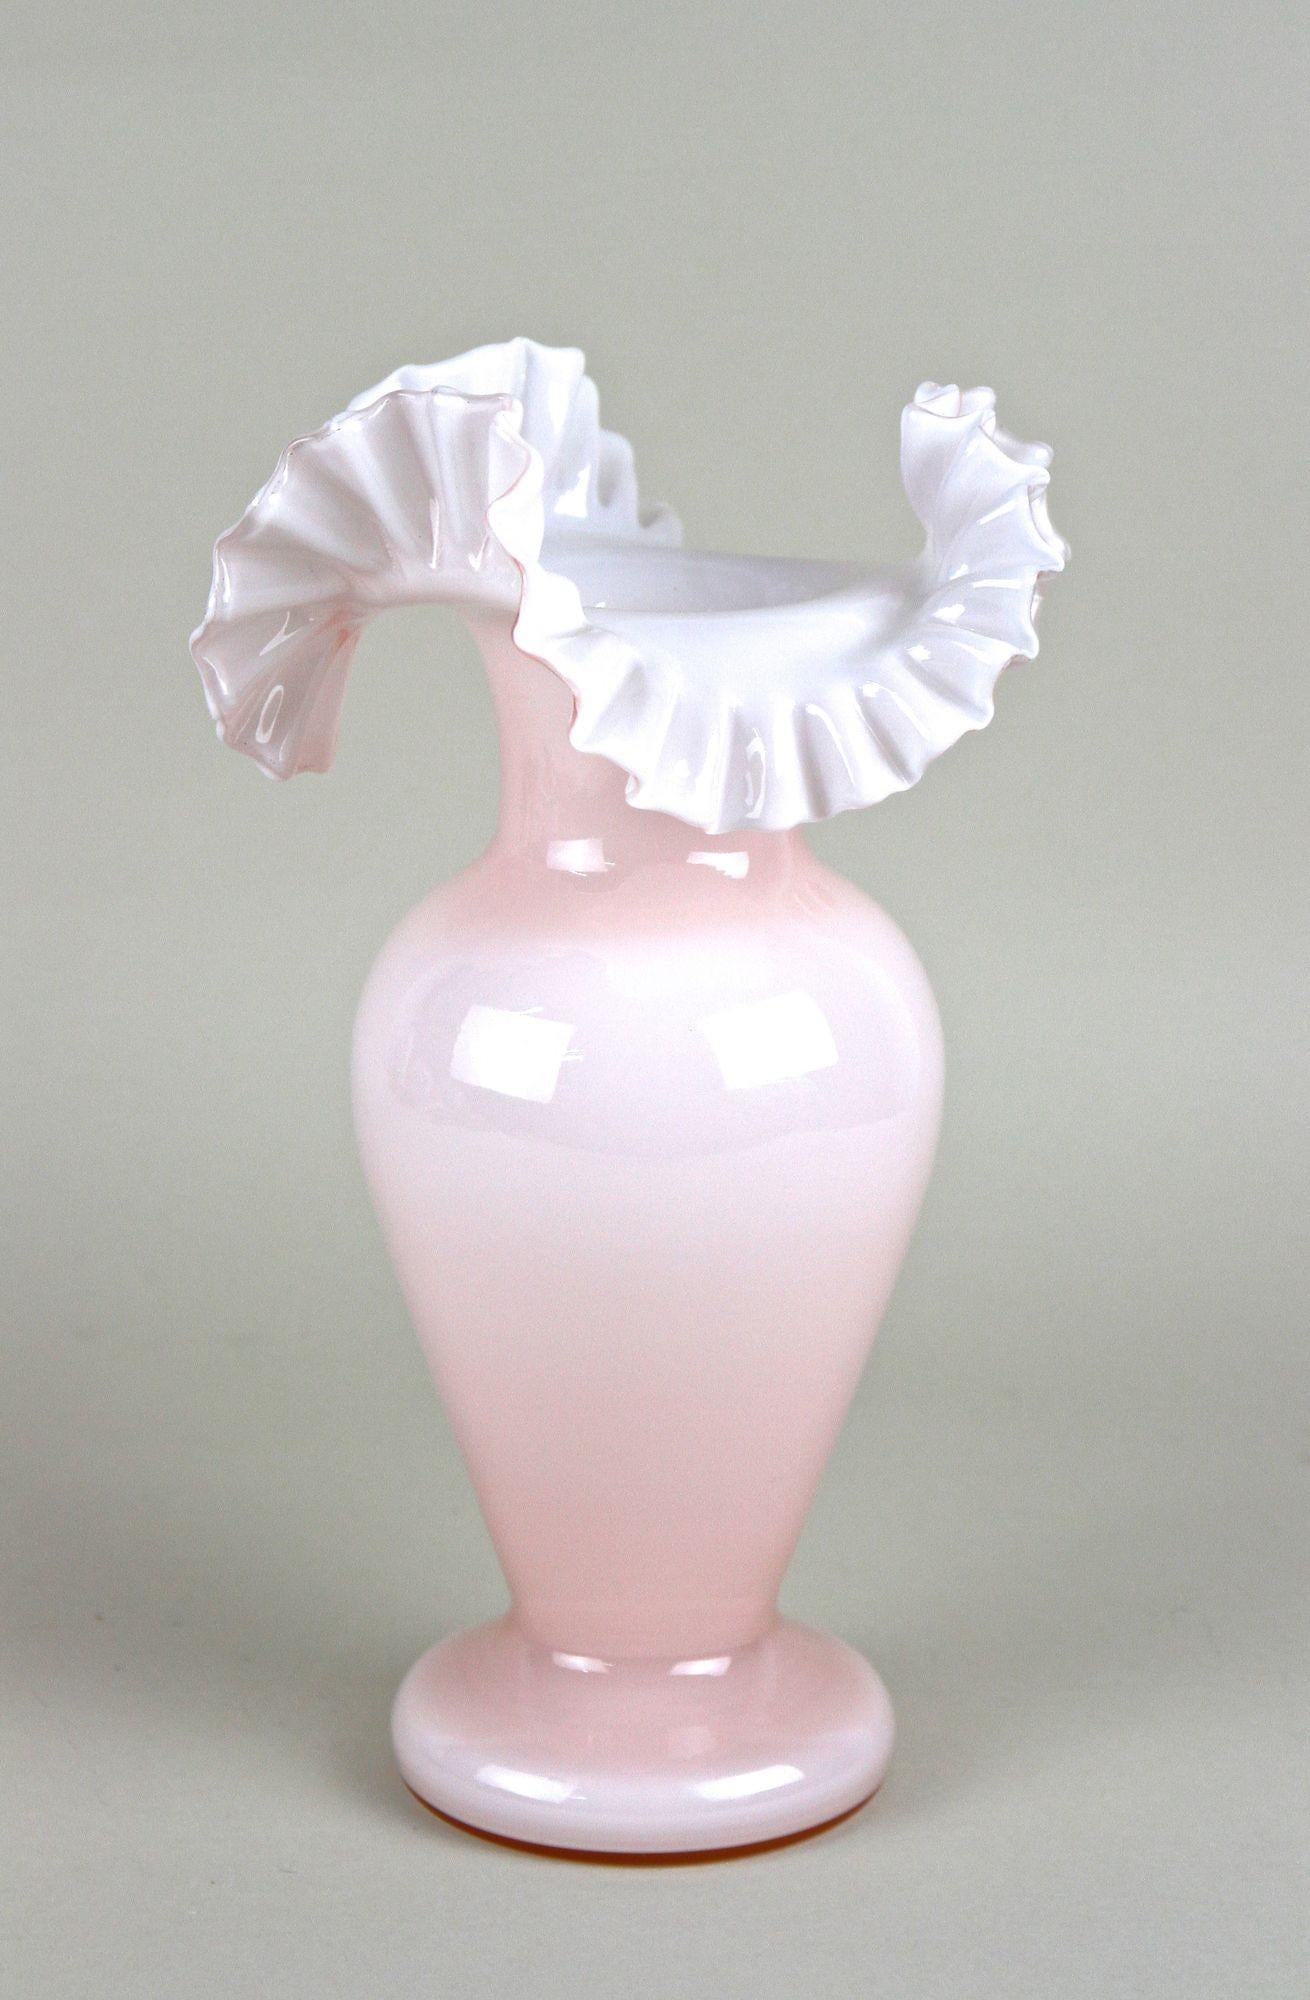 Lovely, early 20th century glass vase with frilly edge coming from the famous Art Nouveau period in Austria around 1900. The mouthblown light pink flashed glass body shows a beautiful bulby design. An absolute highlight on this special Art Nouveau